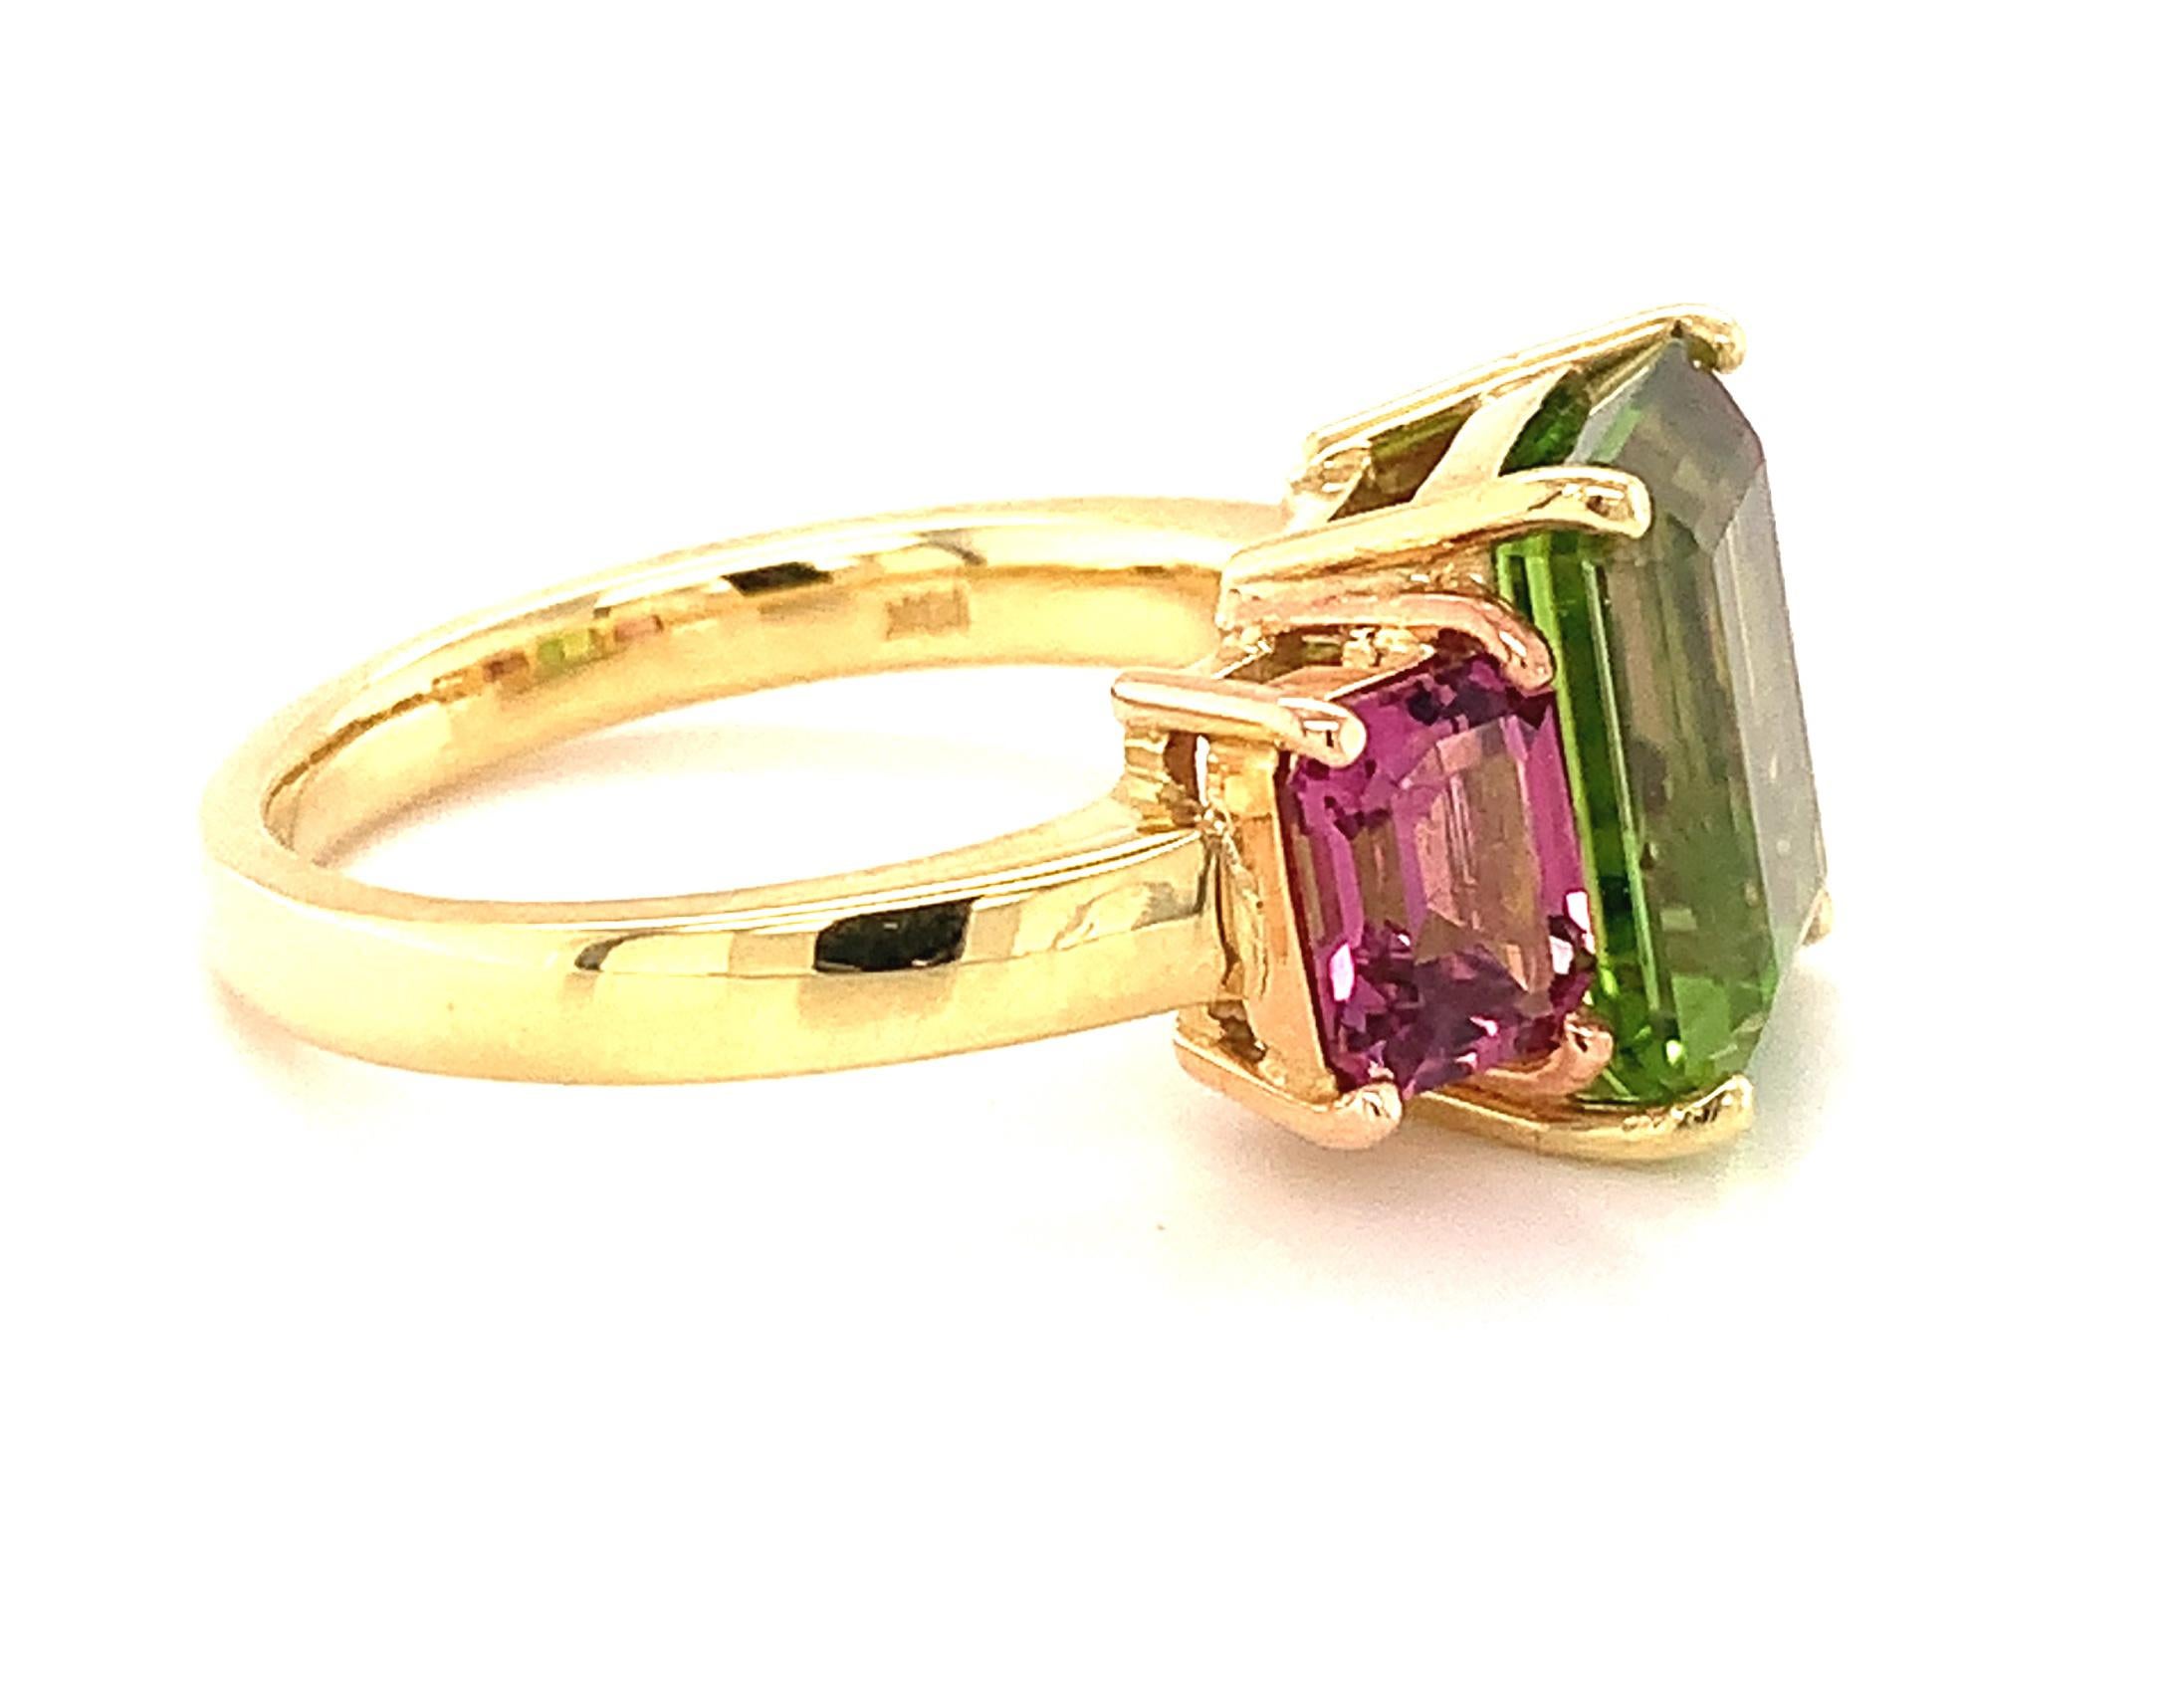 Emerald Cut 5.49 Carat Peridot and Rhodolite Garnet Three-Stone Ring in Yellow and Rose Gold